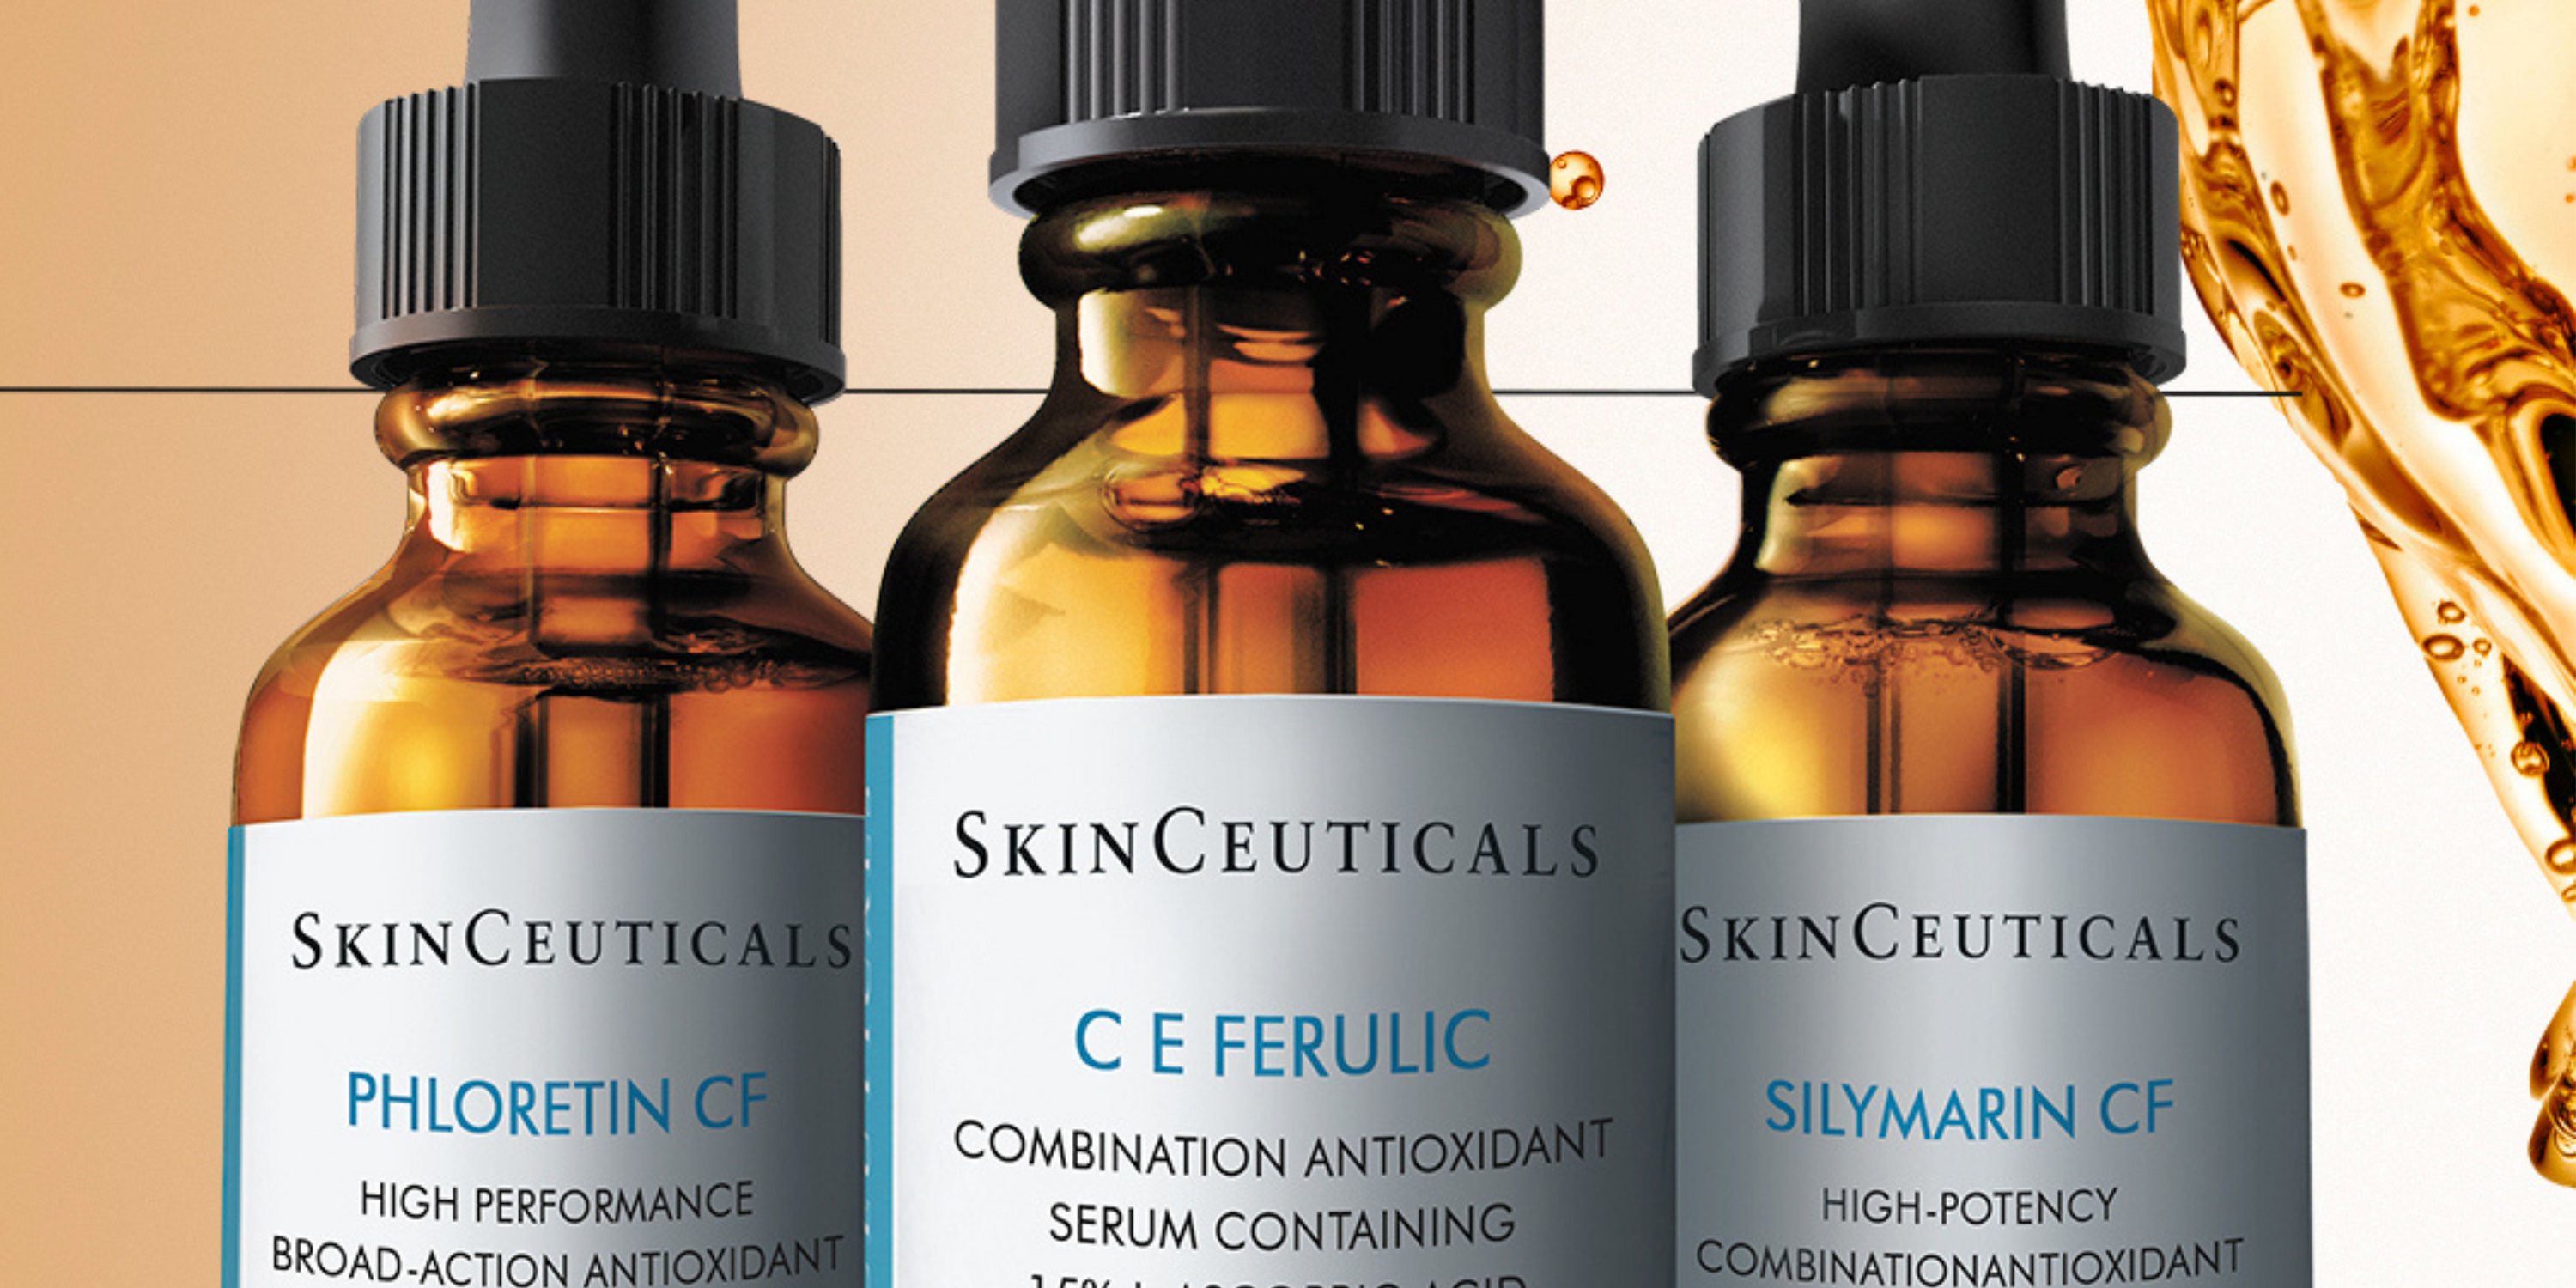 The Benefits of Using Skinceuticals Products Containing Medical-Grade Ingredients